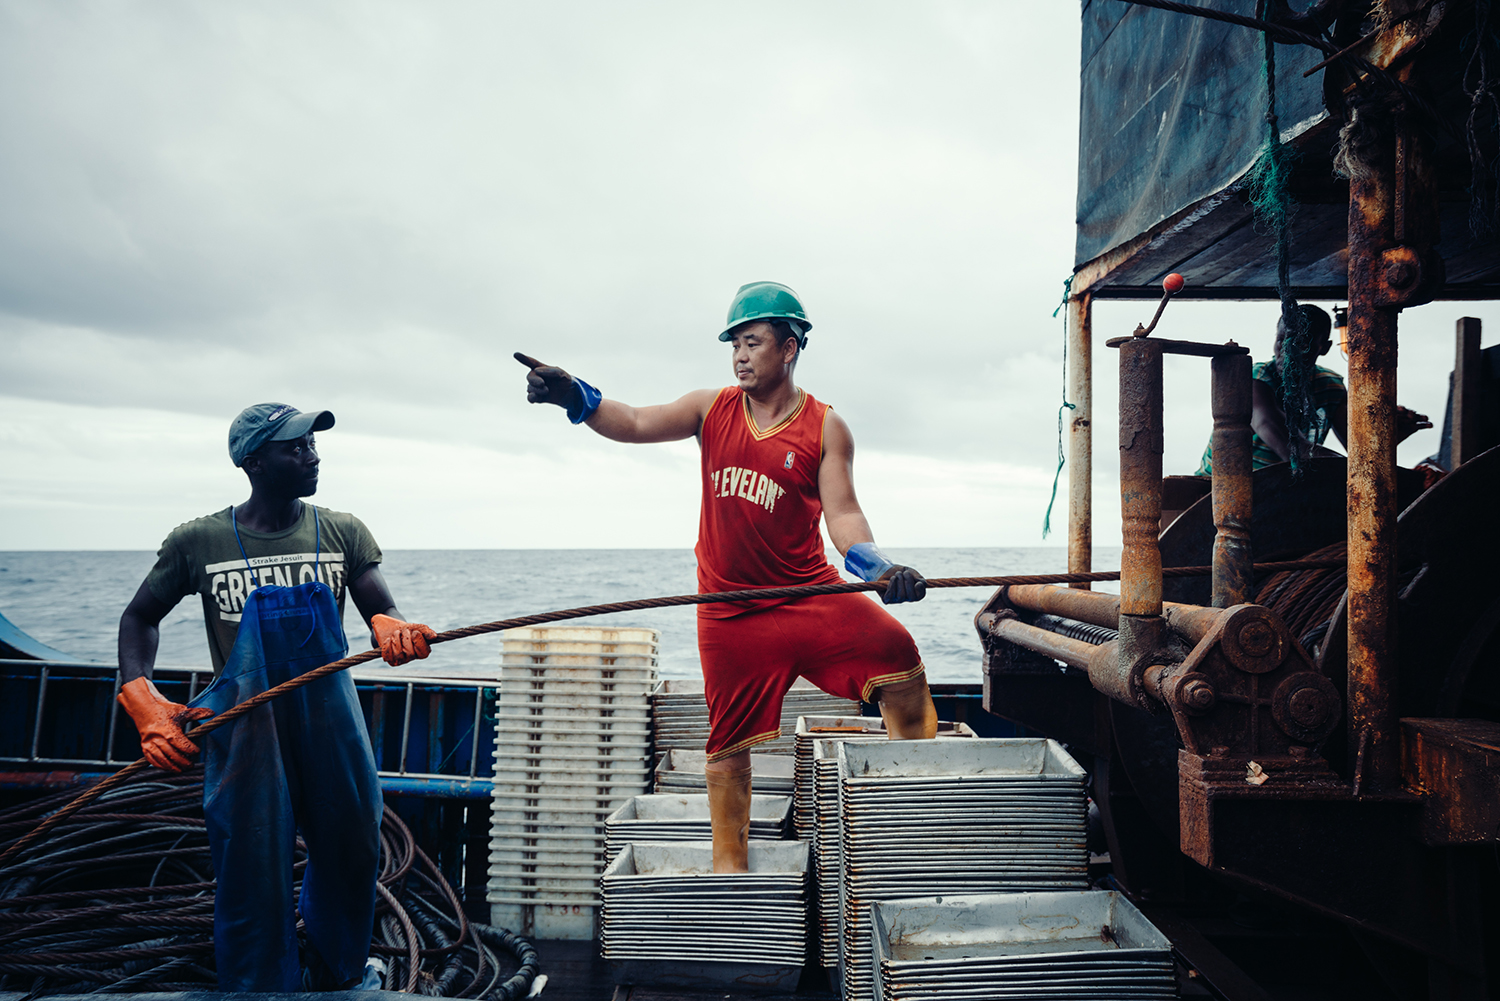 On another ship owned by Fujian Shihai Fisheries Co., Ltd, First Mate Wang directs a local sailor drawing in a net, July 25, 2016. Wang’s ship has already been at sea for more than 20 days. It is now returning to a port in Dakar. According to a Chinese government report, in 2015 there were approximately 550 Chinese fishing vessels operating in African waters.